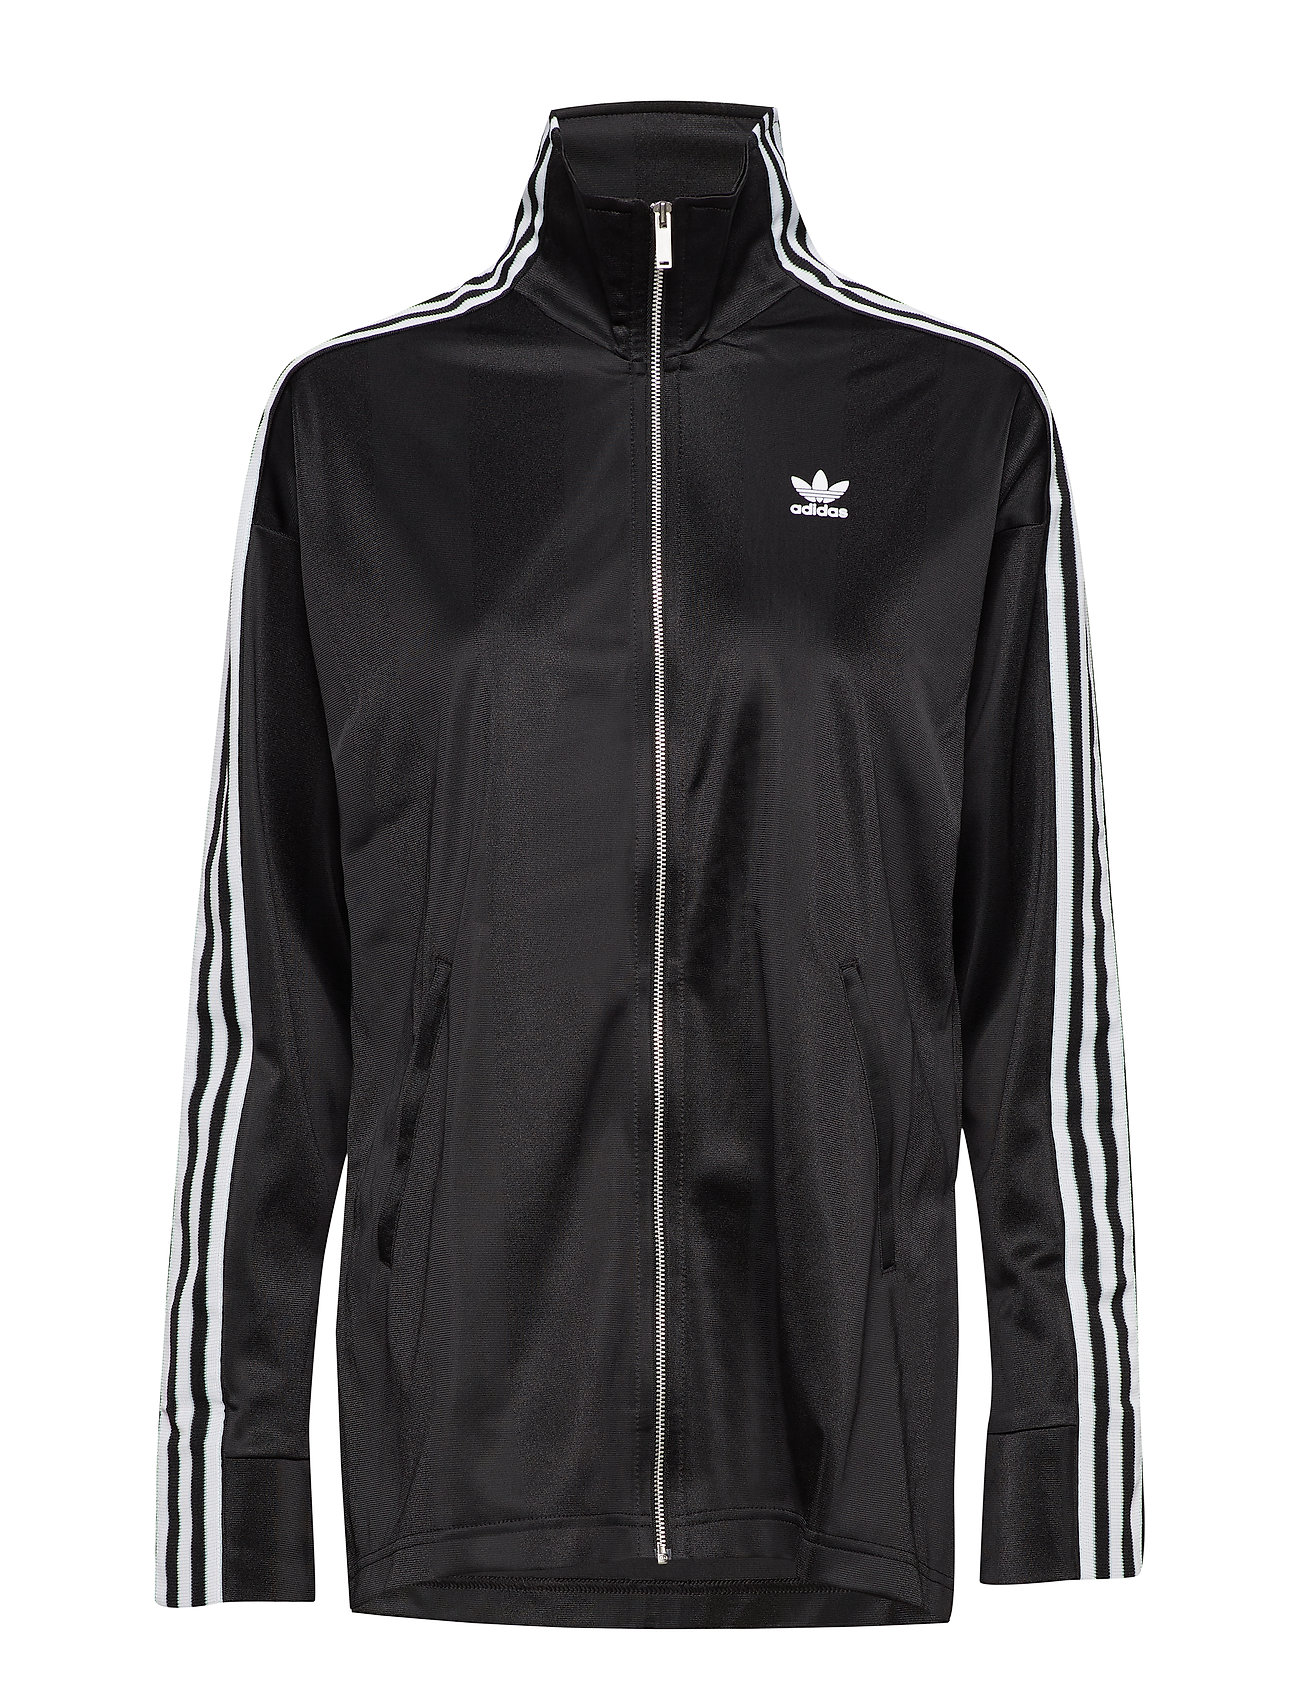 adidas classic tracksuit top